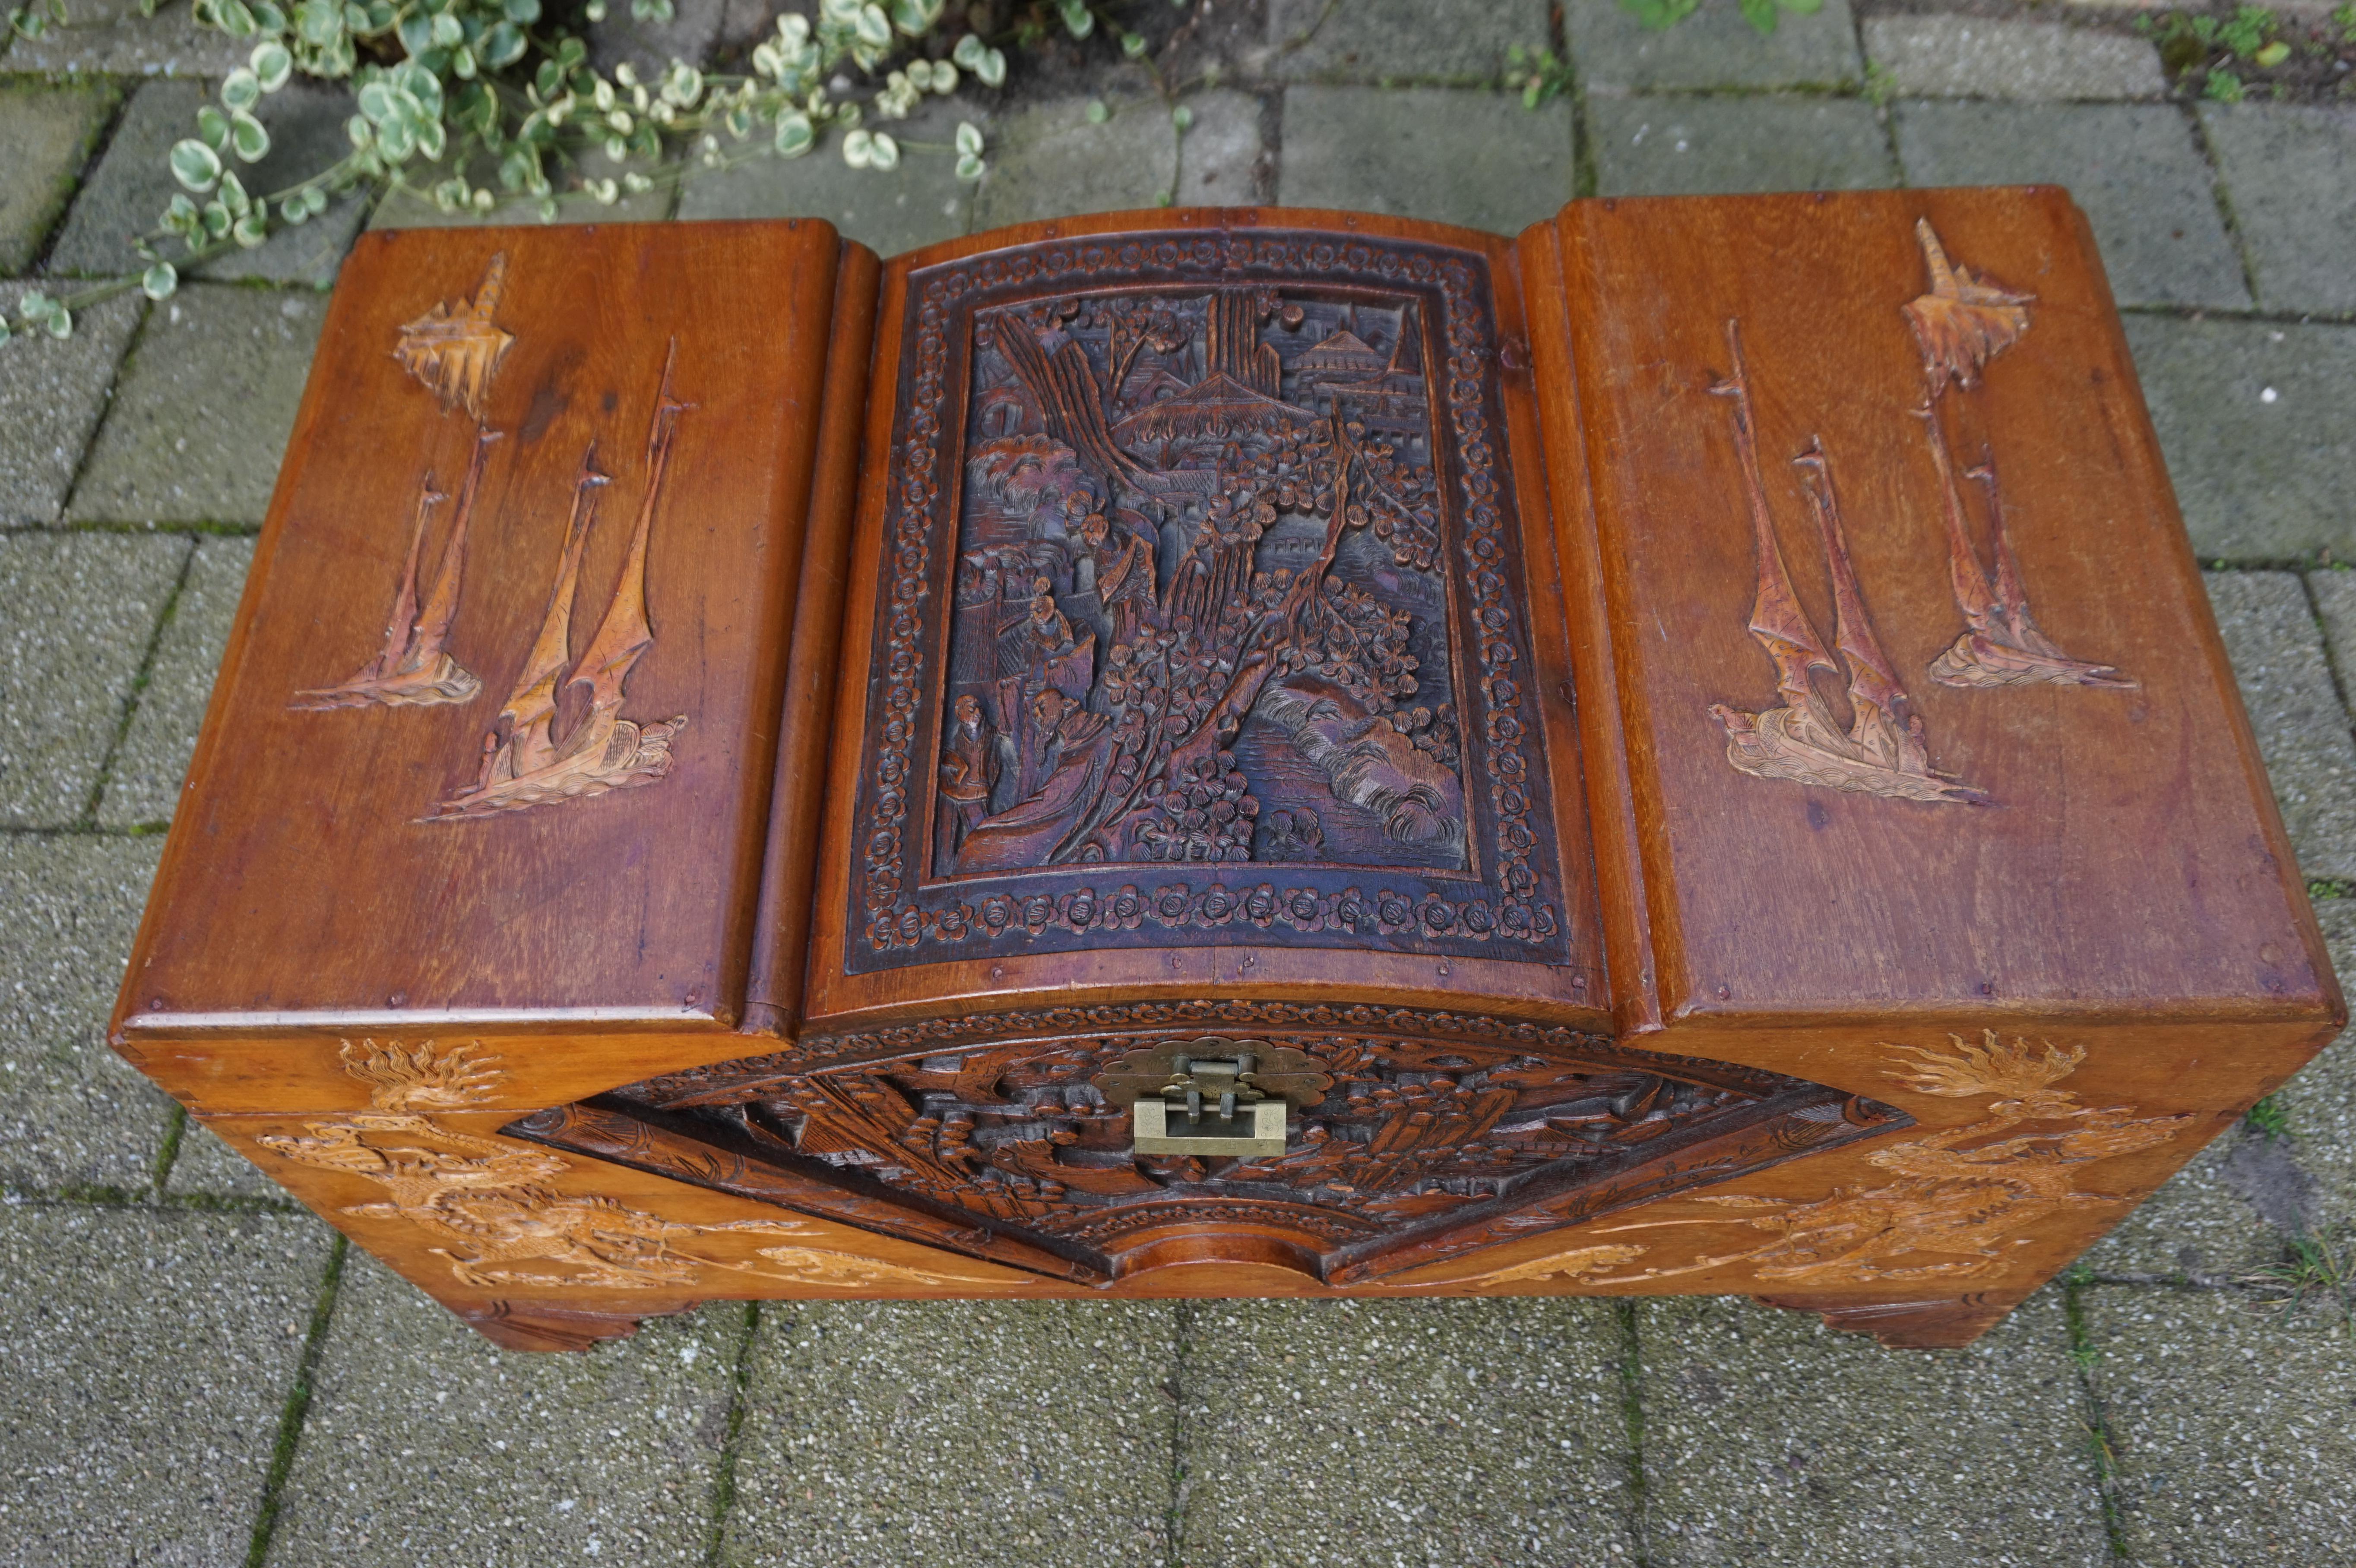 Early 20th century, richly carved Chinese Trunk with decorations all around.

If you are looking for a decorative and useful piece of furniture with a distinct Asian design then this all handcrafted Chinese 'blanket chest' could be perfect. By the